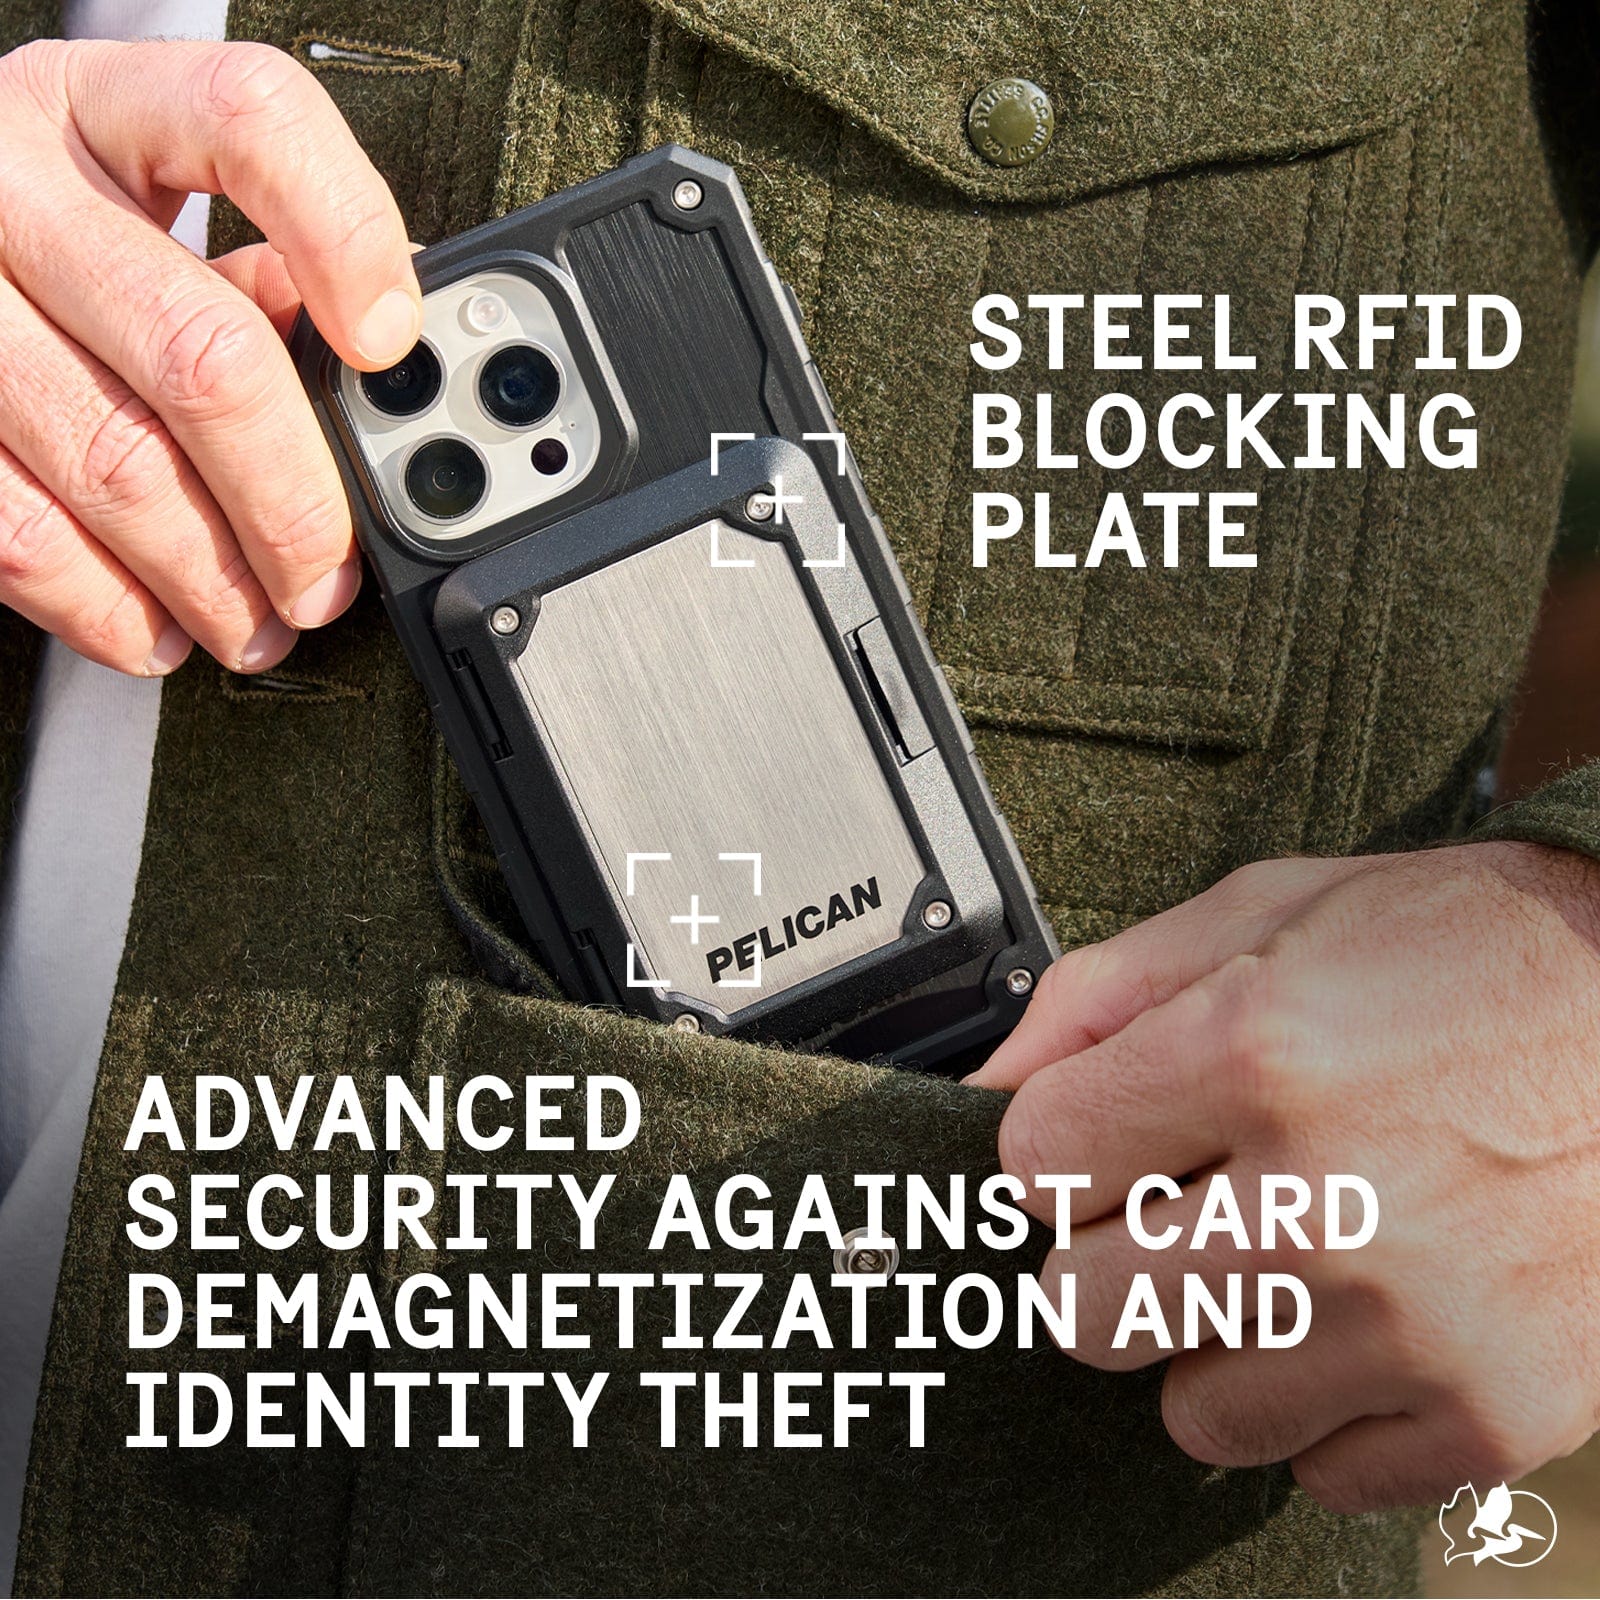 STEEL RFID BLOCKING PLATE. ADVANCES SECURITY AGAINST CARD DEMAGNETIZATION AND IDENTITY THEFT